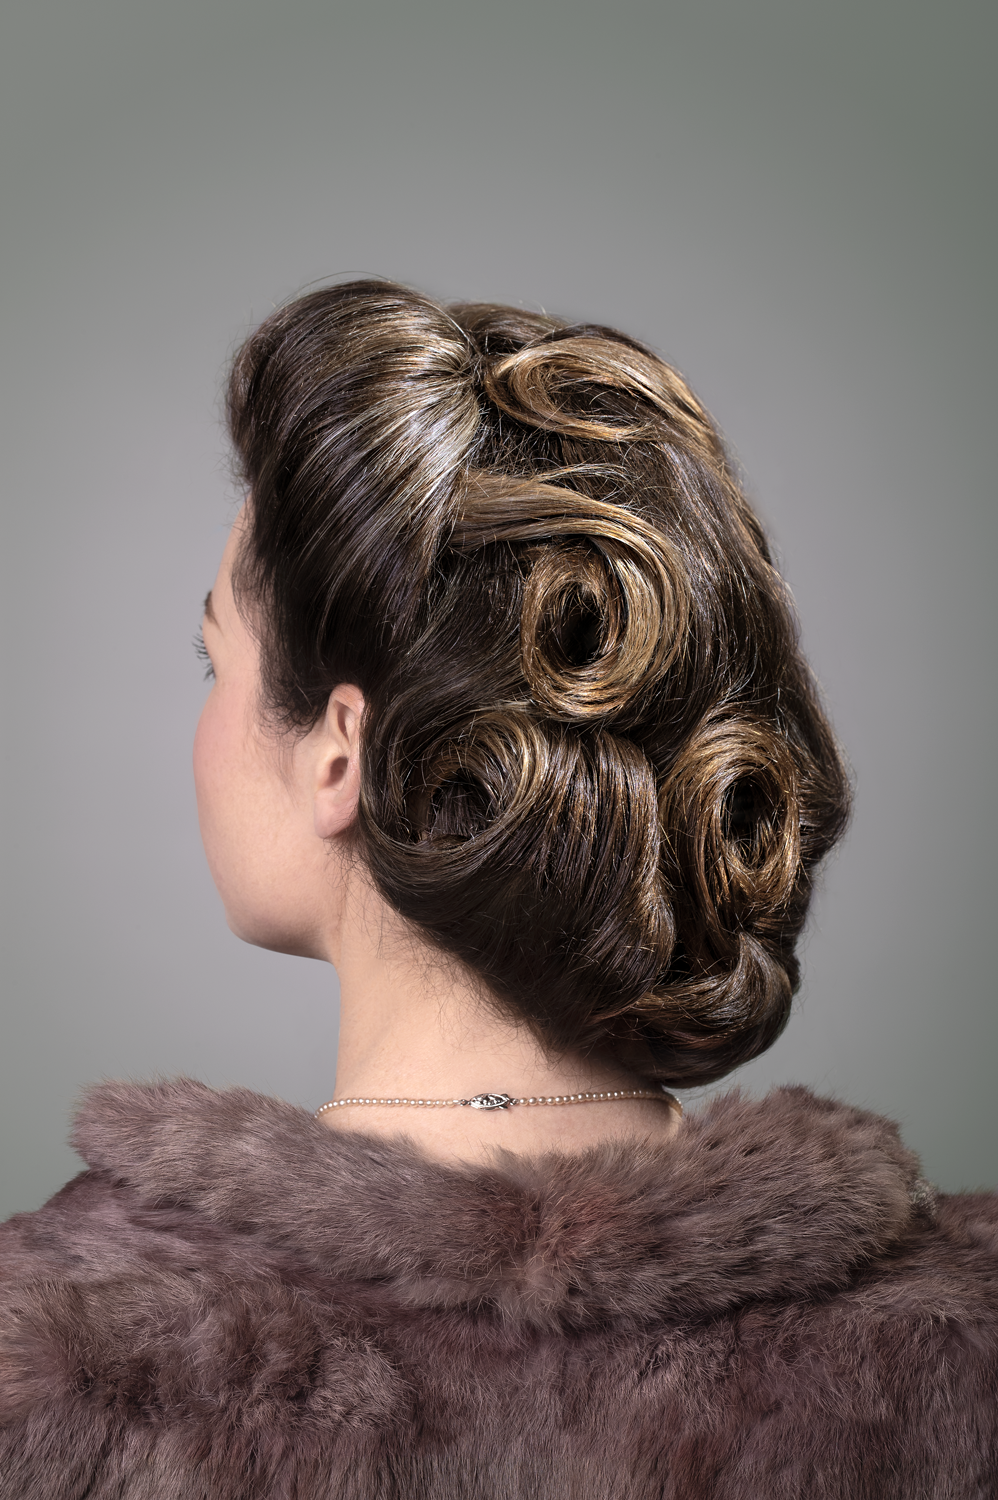 A feminine portrait from behind the head. 1940's hair style called Victory Roll. Pearls, fur jacket. Subject looking away into the distance face not visible. 